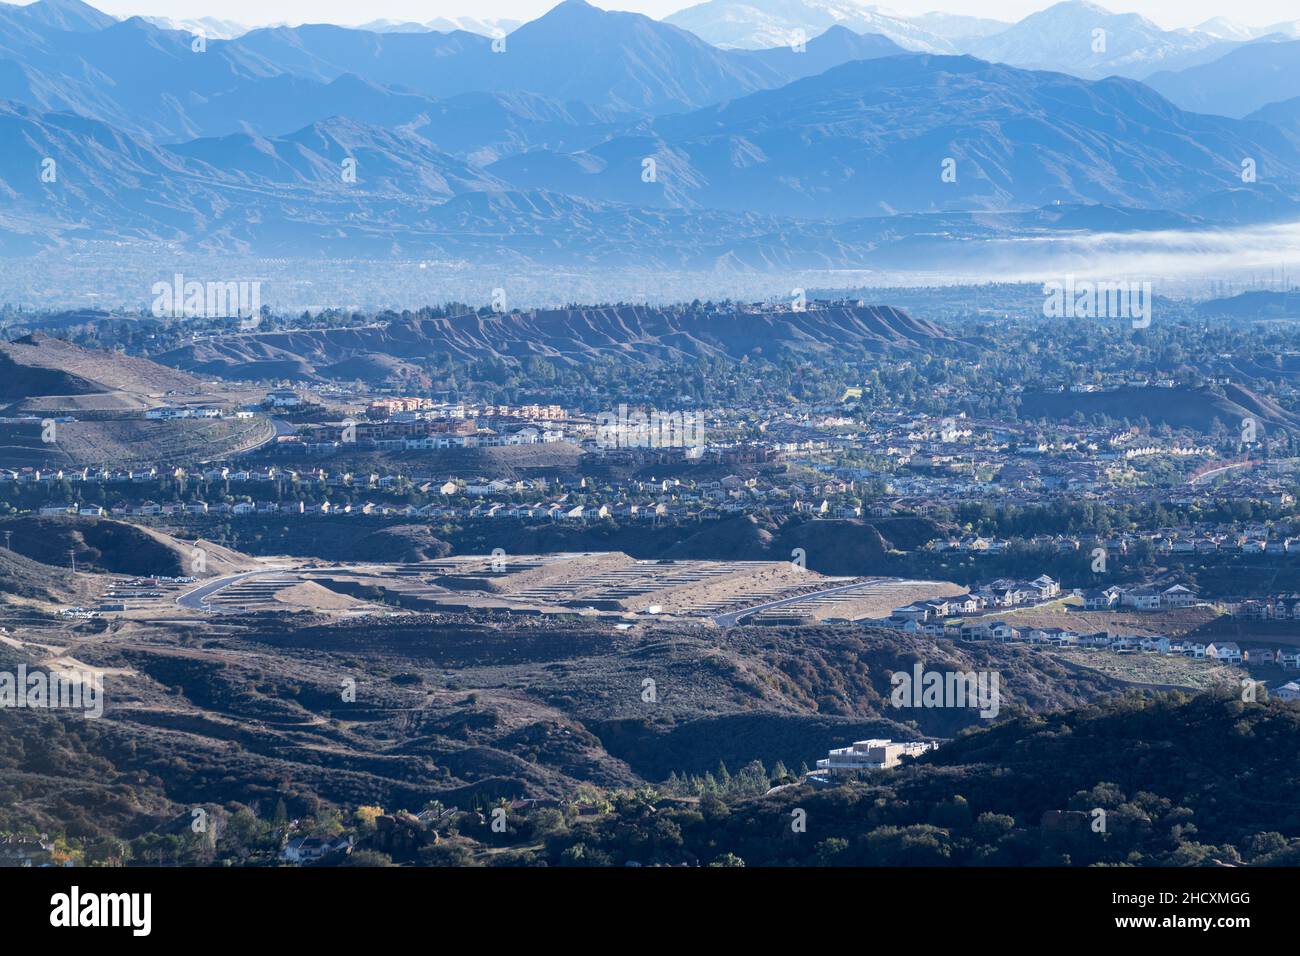 Mountain view of the Porter Ranch neighborhood in the San Fernando Valley area of Los Angeles, California. Stock Photo